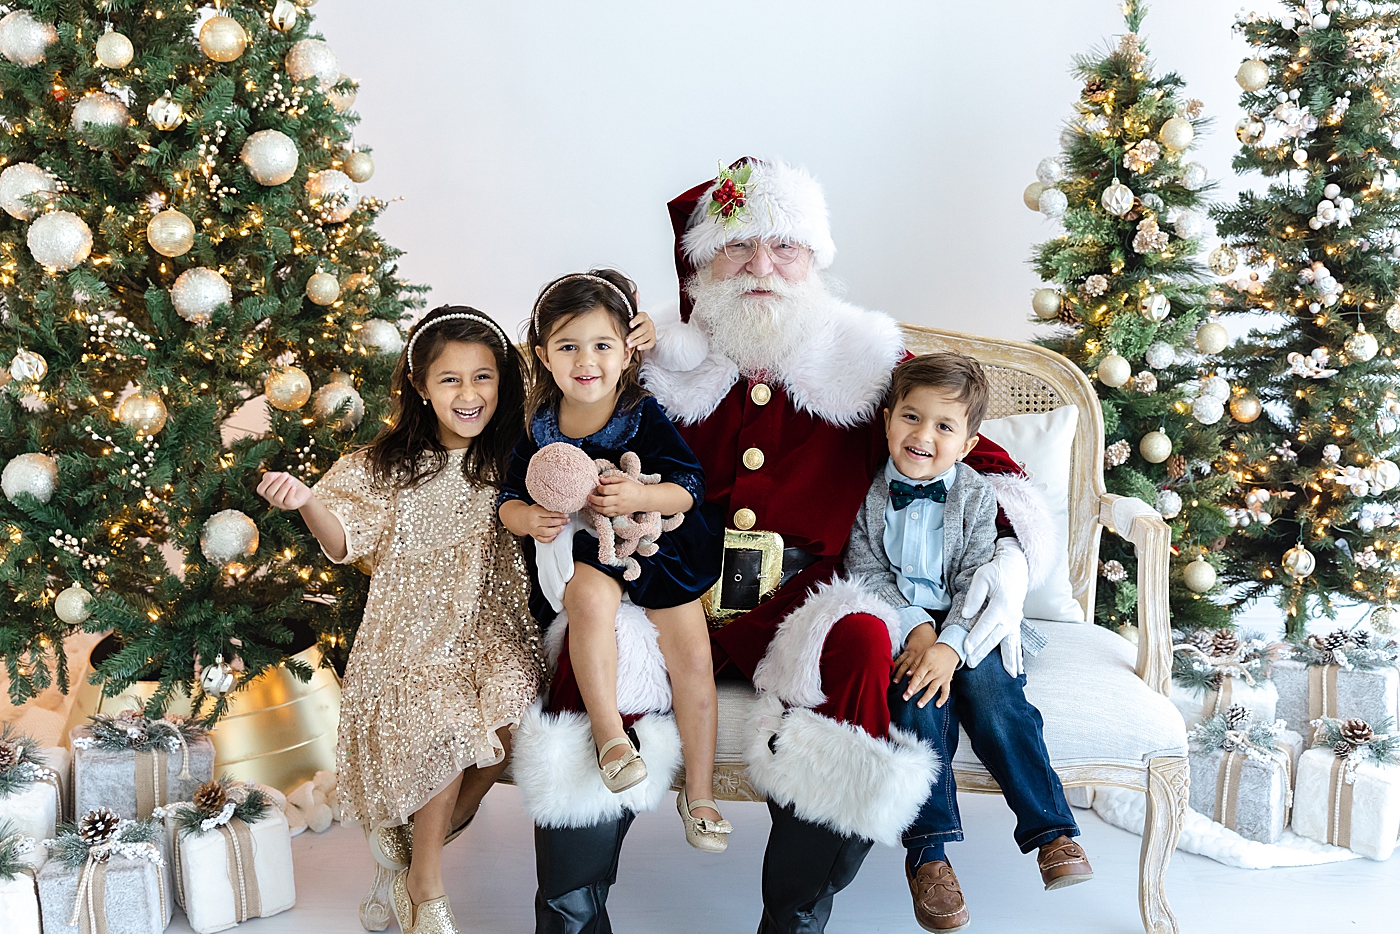 Santa sitting on a sofa with three siblings | Image by Sana Ahmed Photography